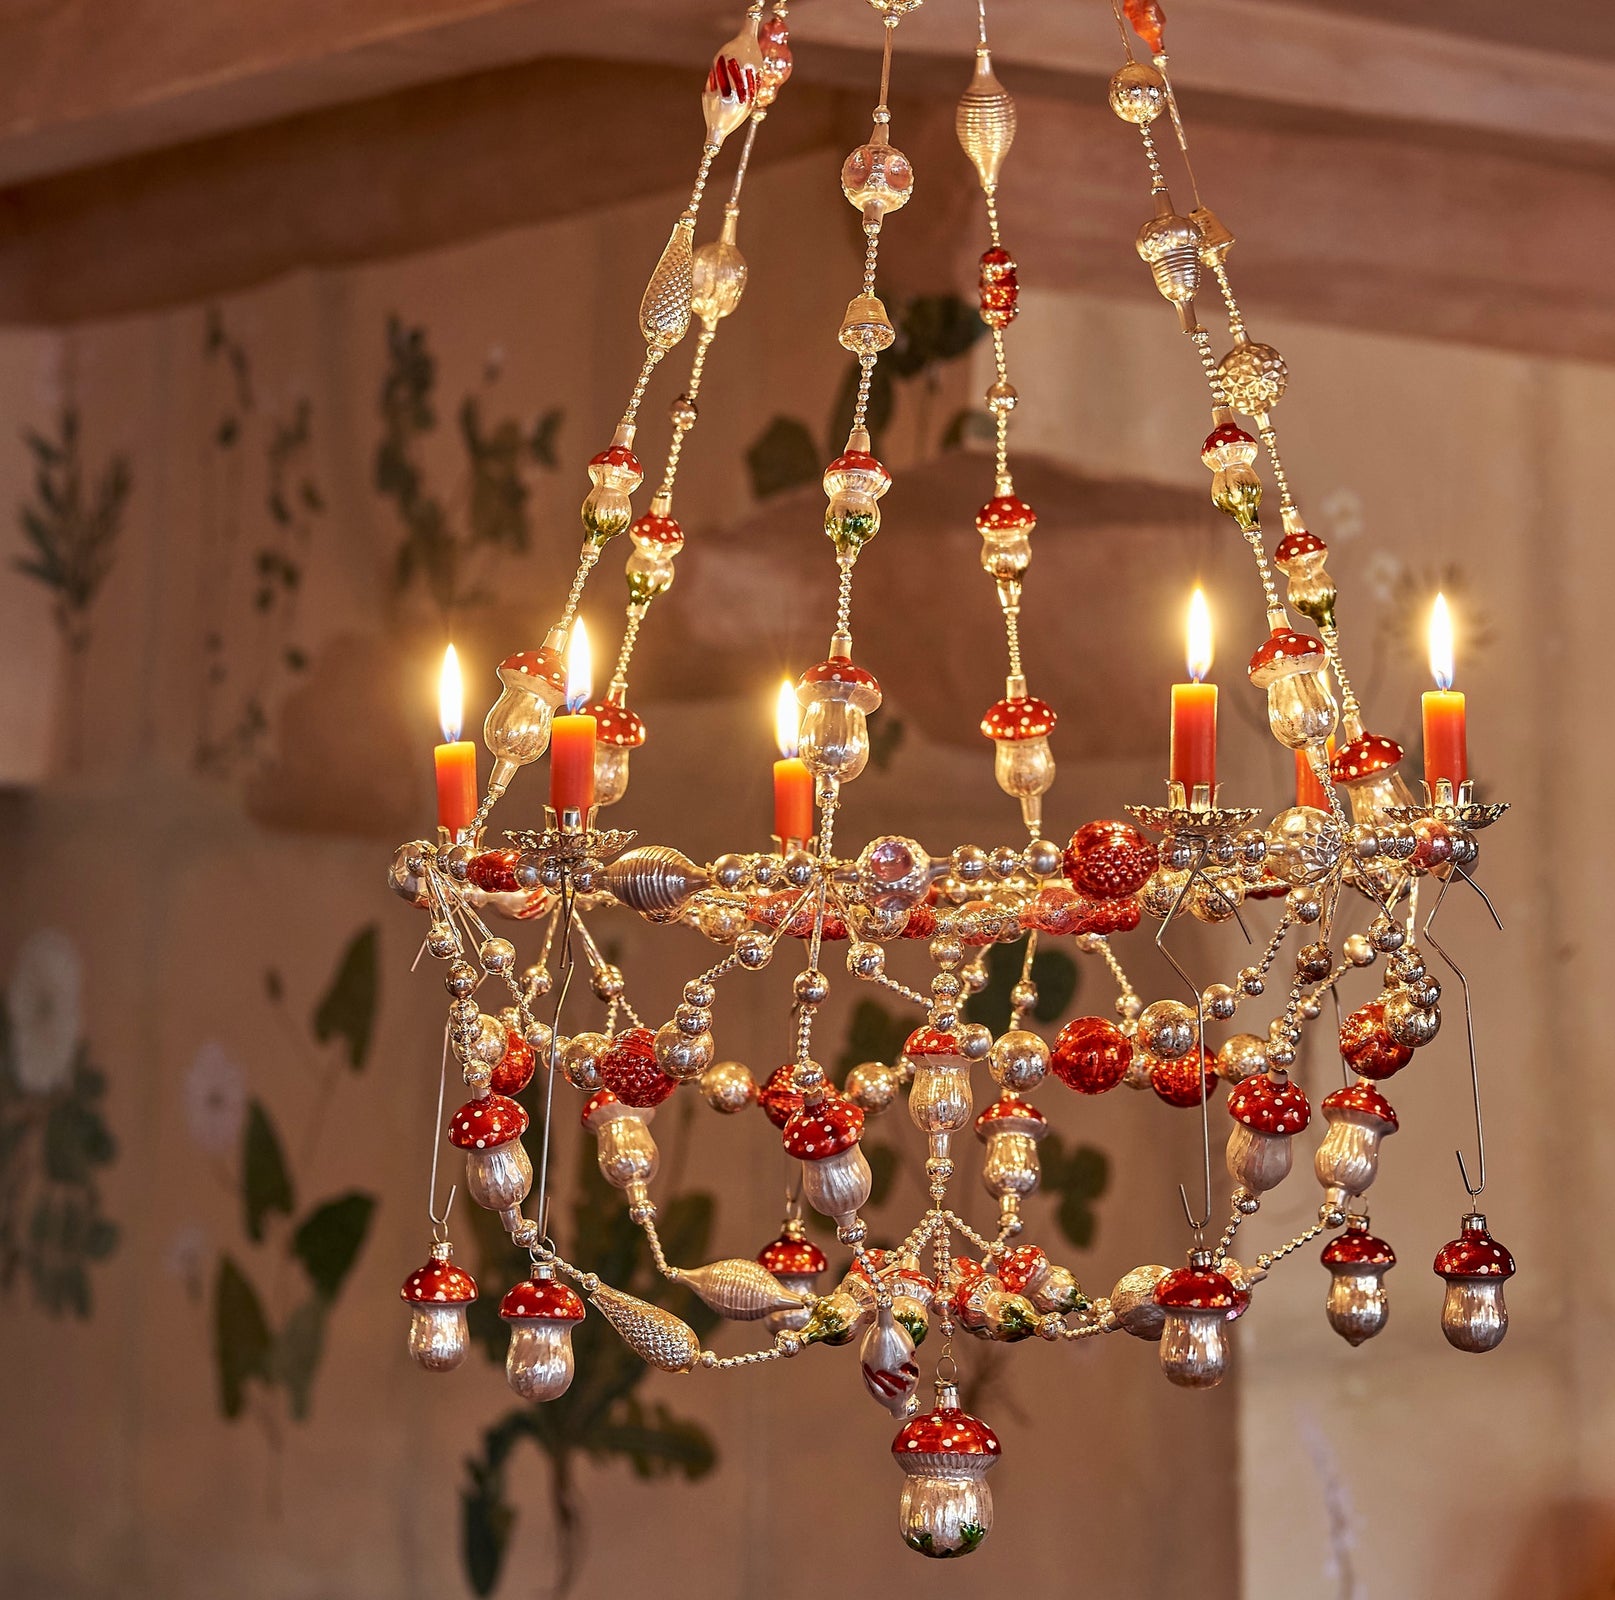 Mushroom Chandelier Made from Glass Ornaments with Candle Holders